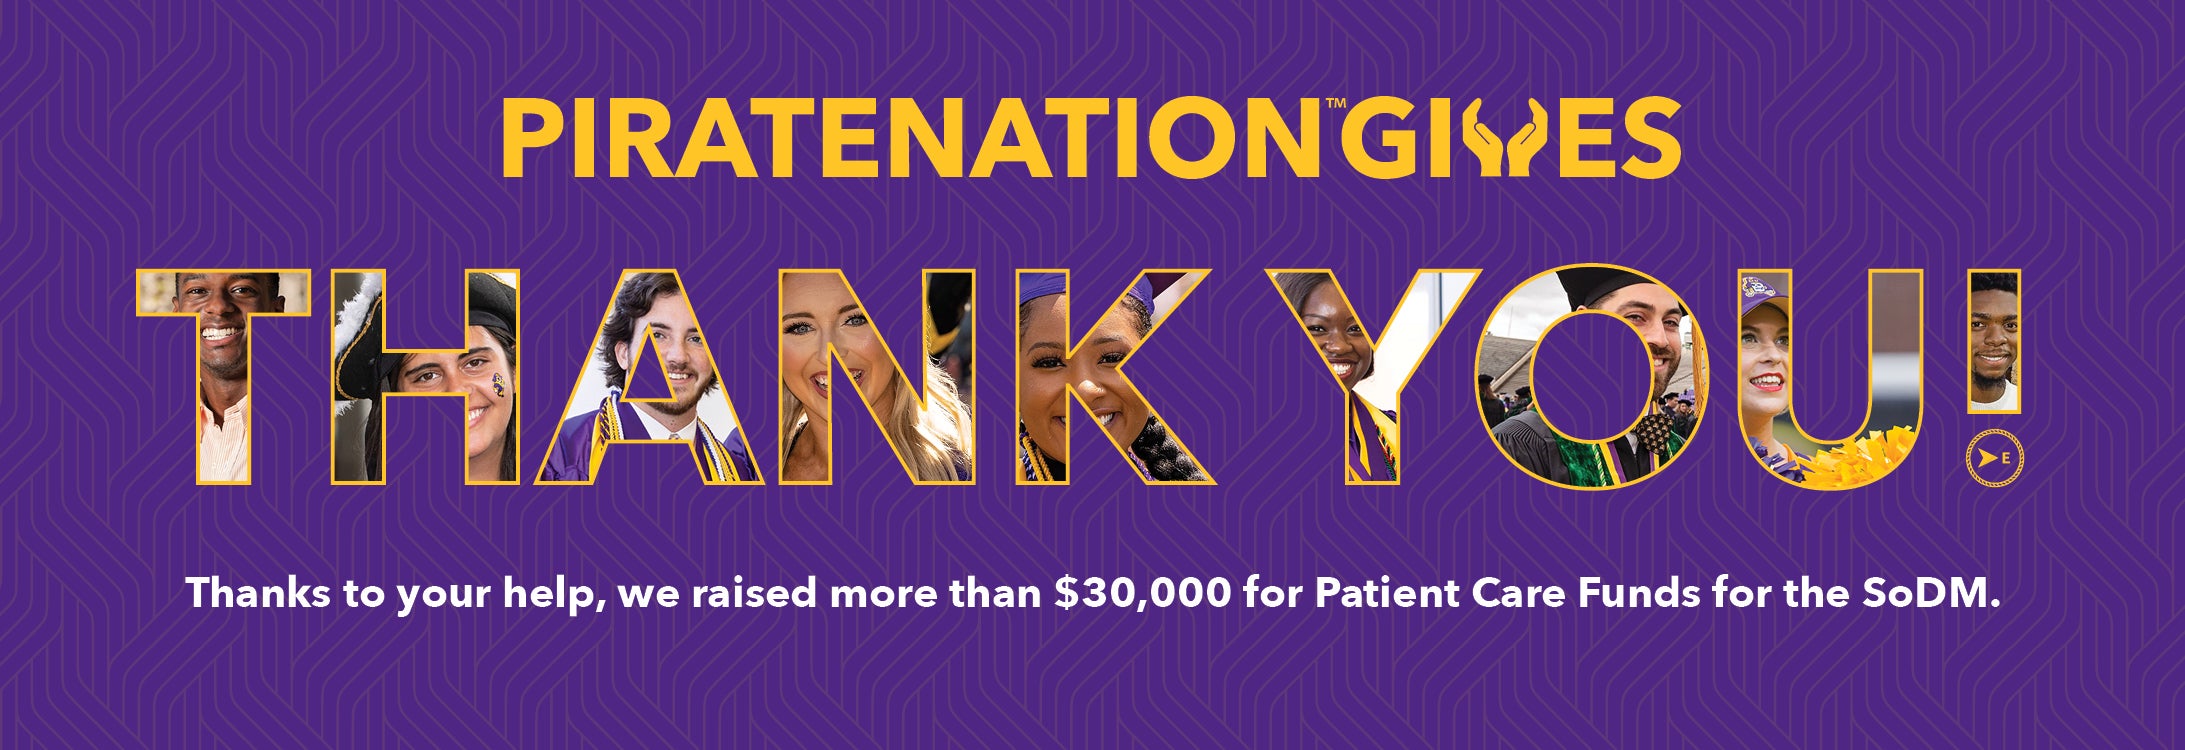 Thanks to your help, we raised more than $30,000 for Patient Care Funds in the Pirate Nation Gives campaign.